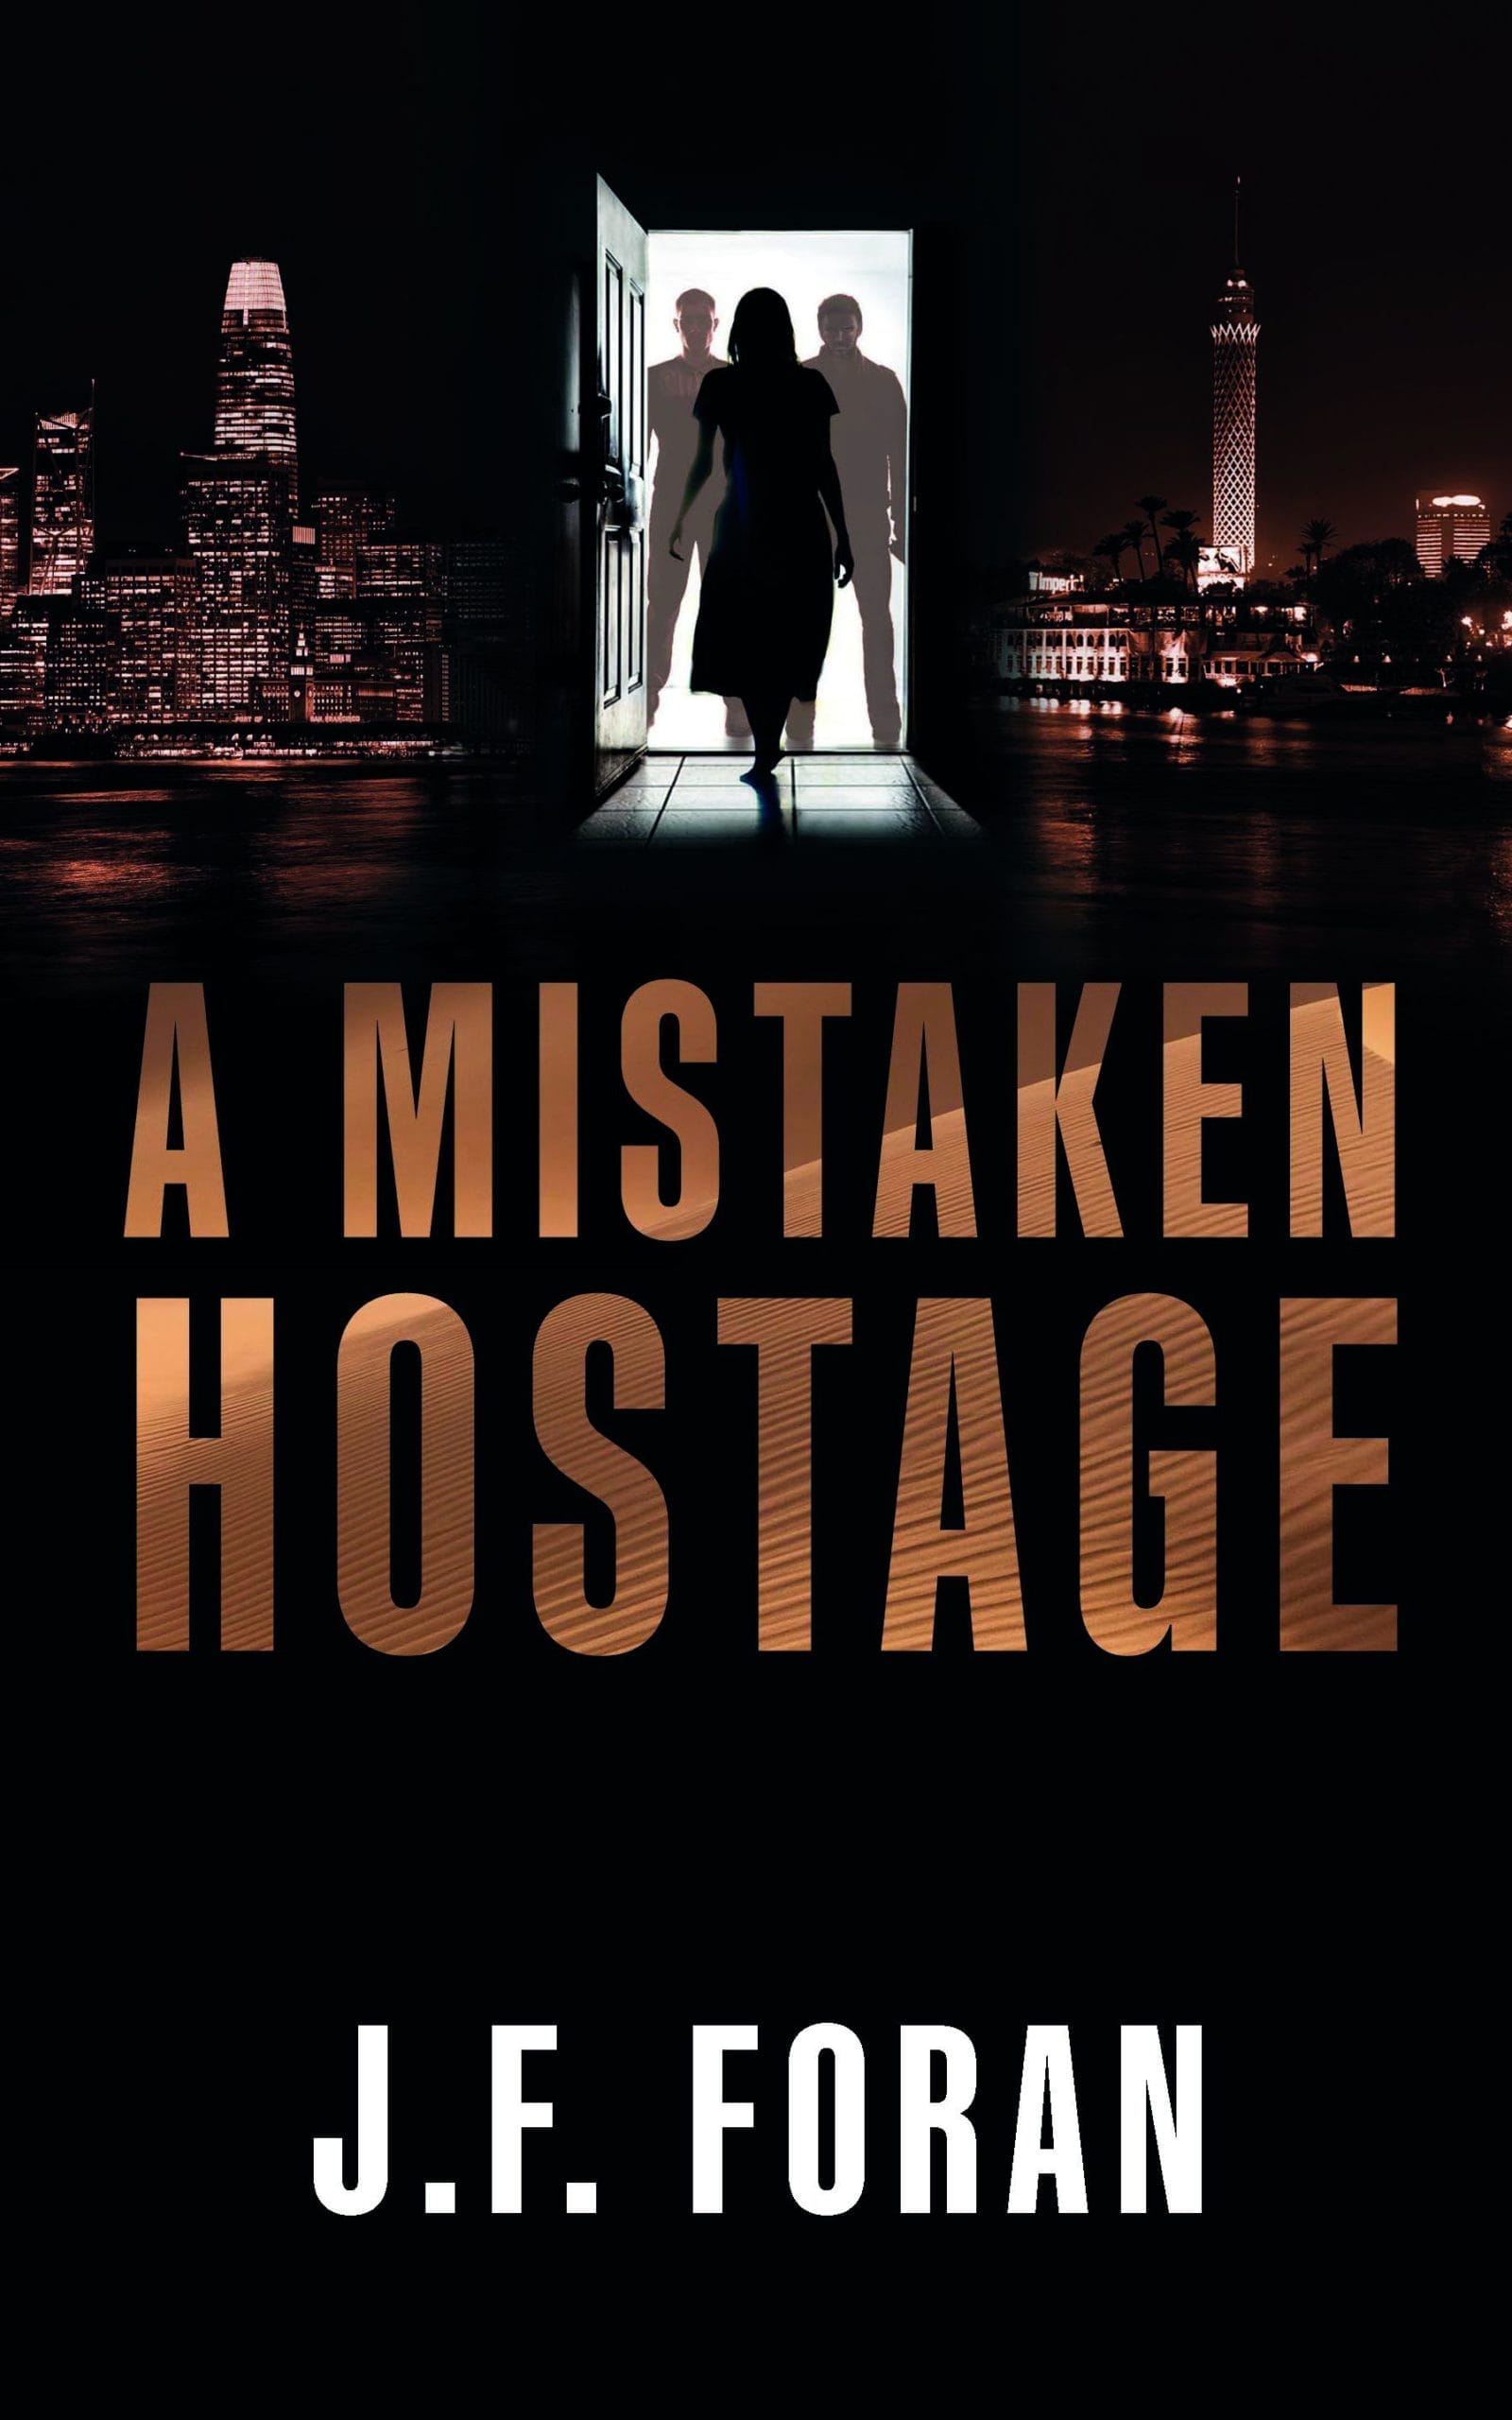 Book cover for "A Mistaken Hostage"